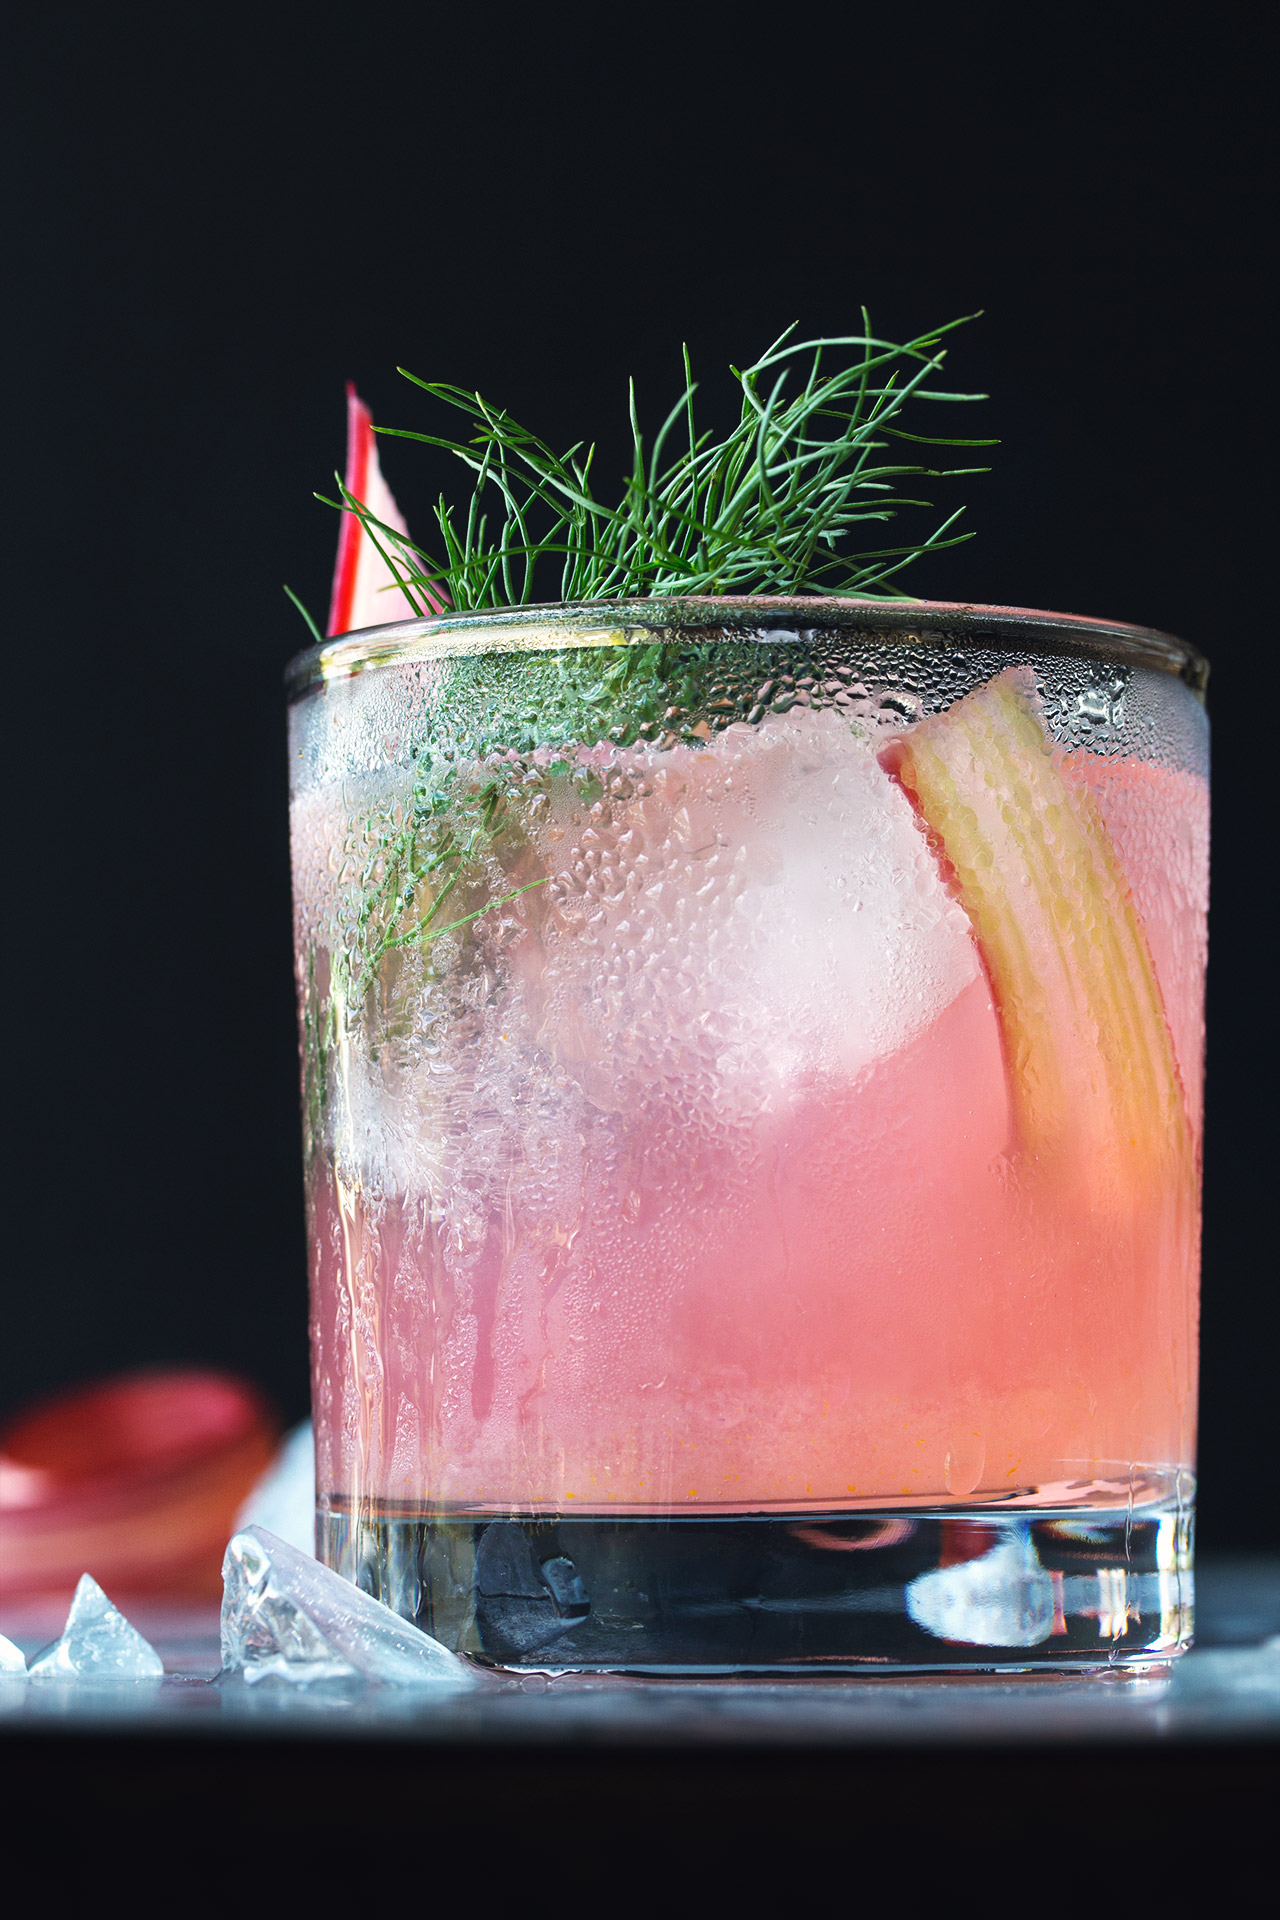 RHUBARB-FENNEL-AND-VERMOUTH-COCKTAIL-RECETA-1